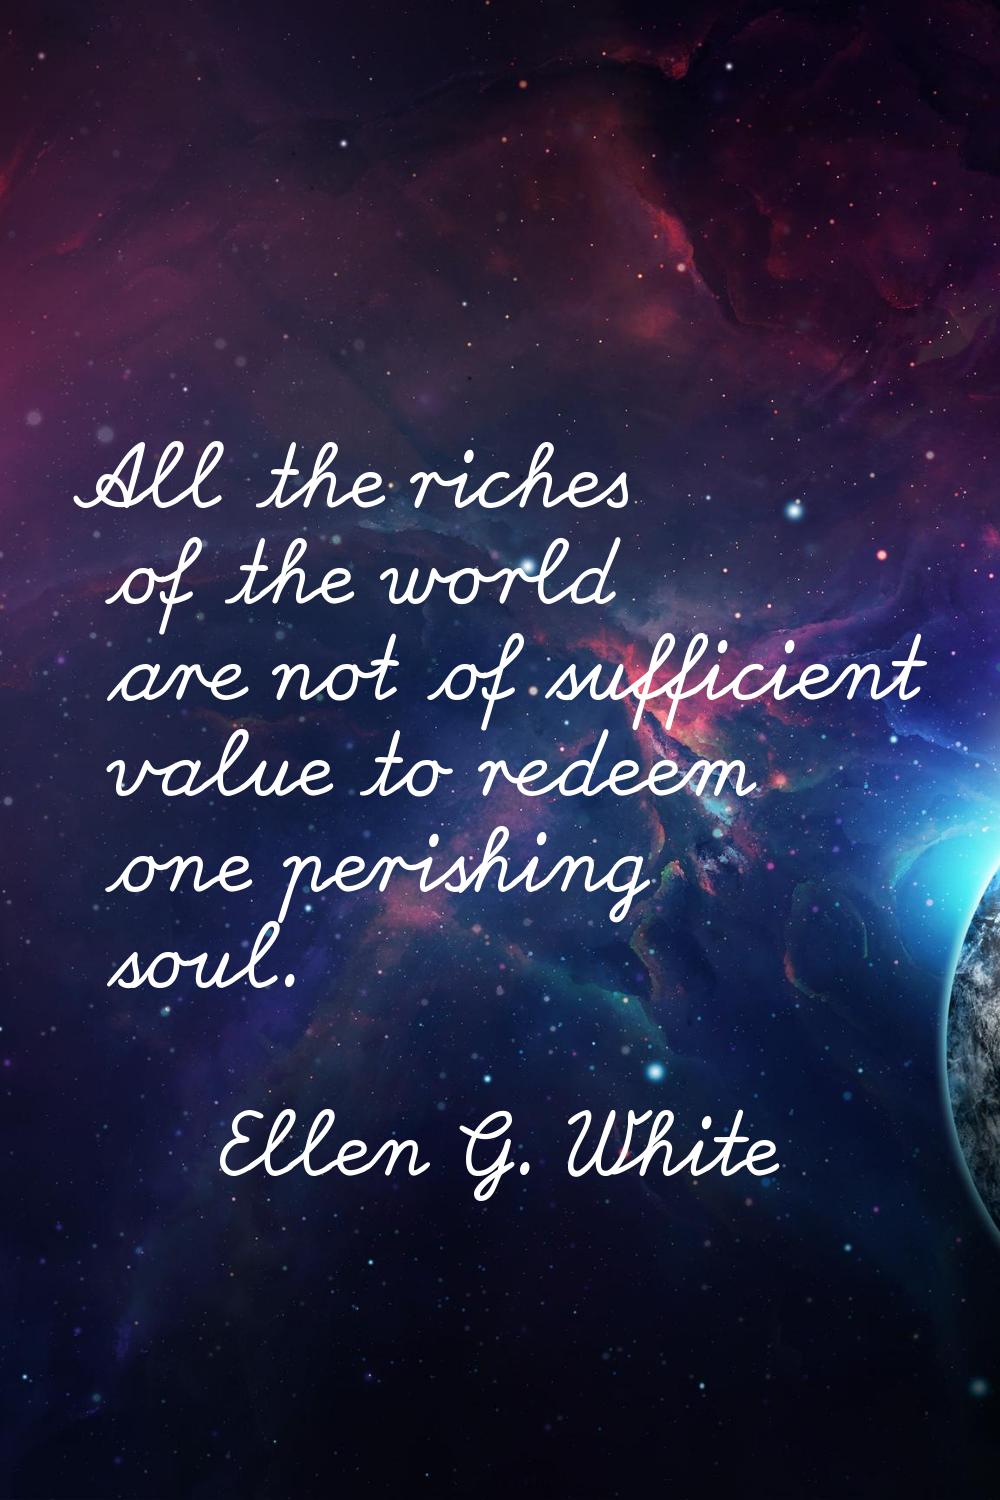 All the riches of the world are not of sufficient value to redeem one perishing soul.